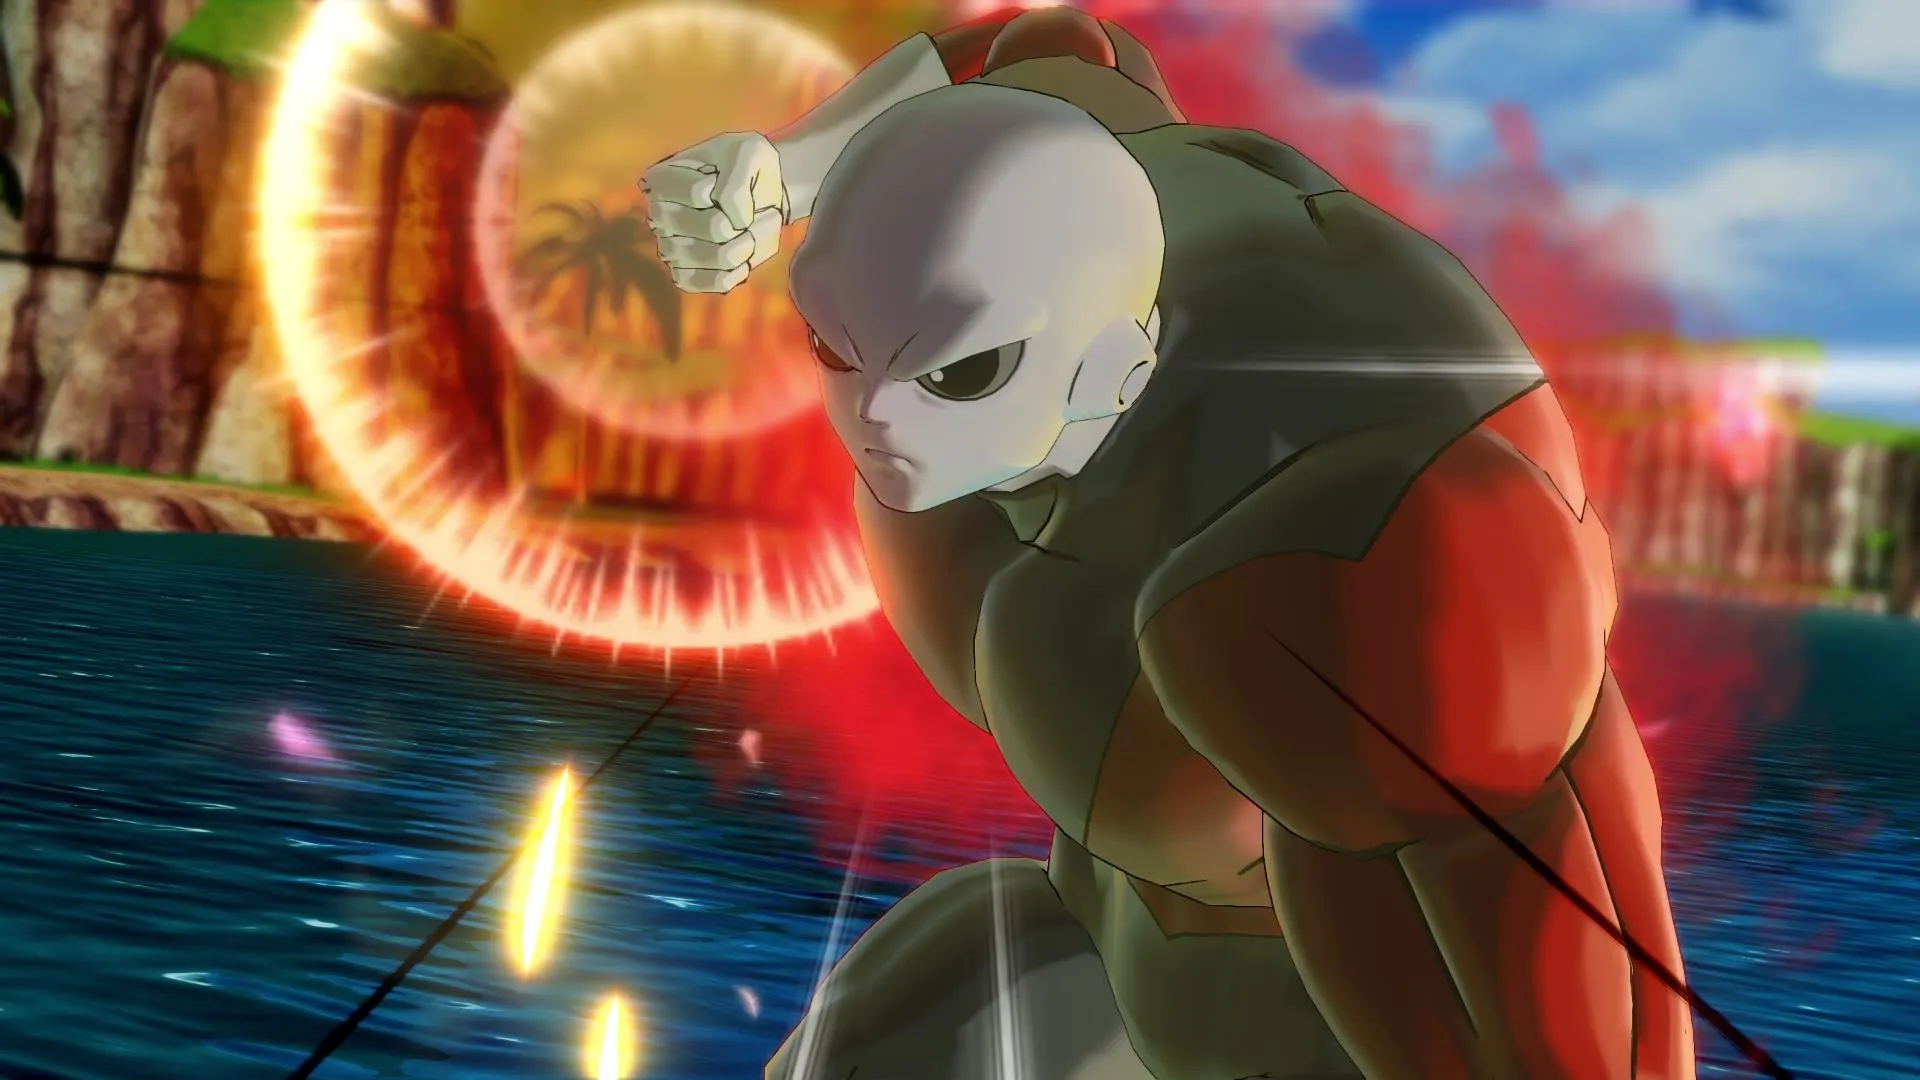 Unique addition to Xenoverse 2 – Northern Star